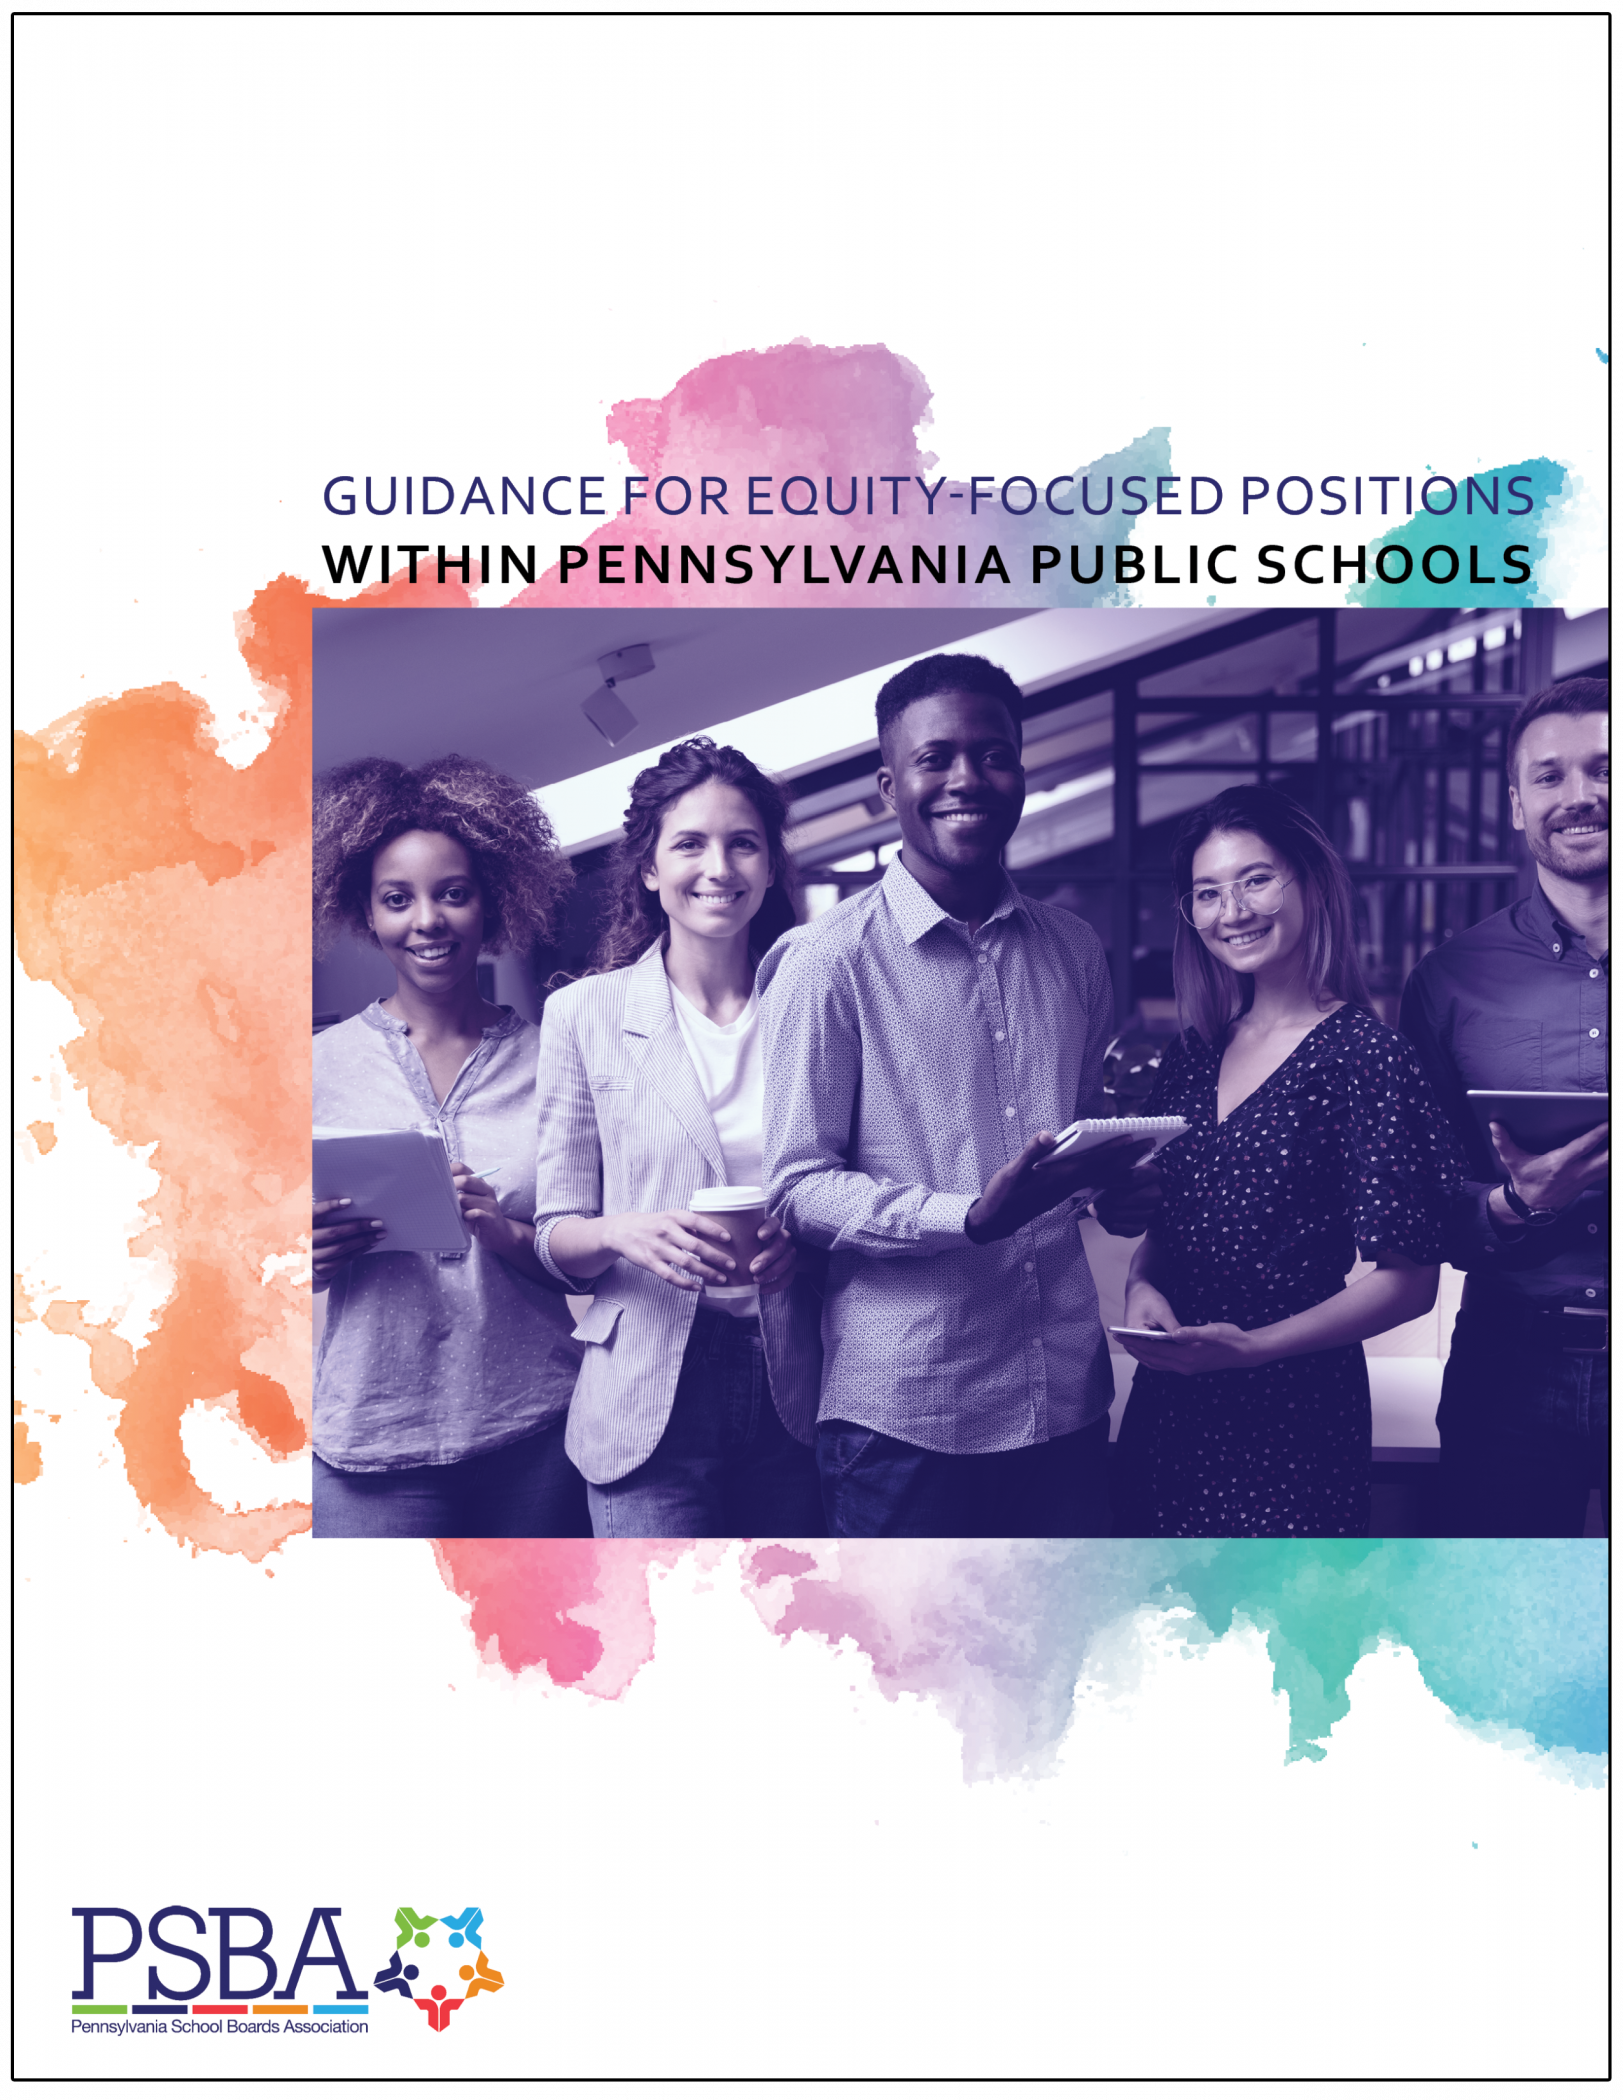 Guidance for equity-focused positions within PA public schools